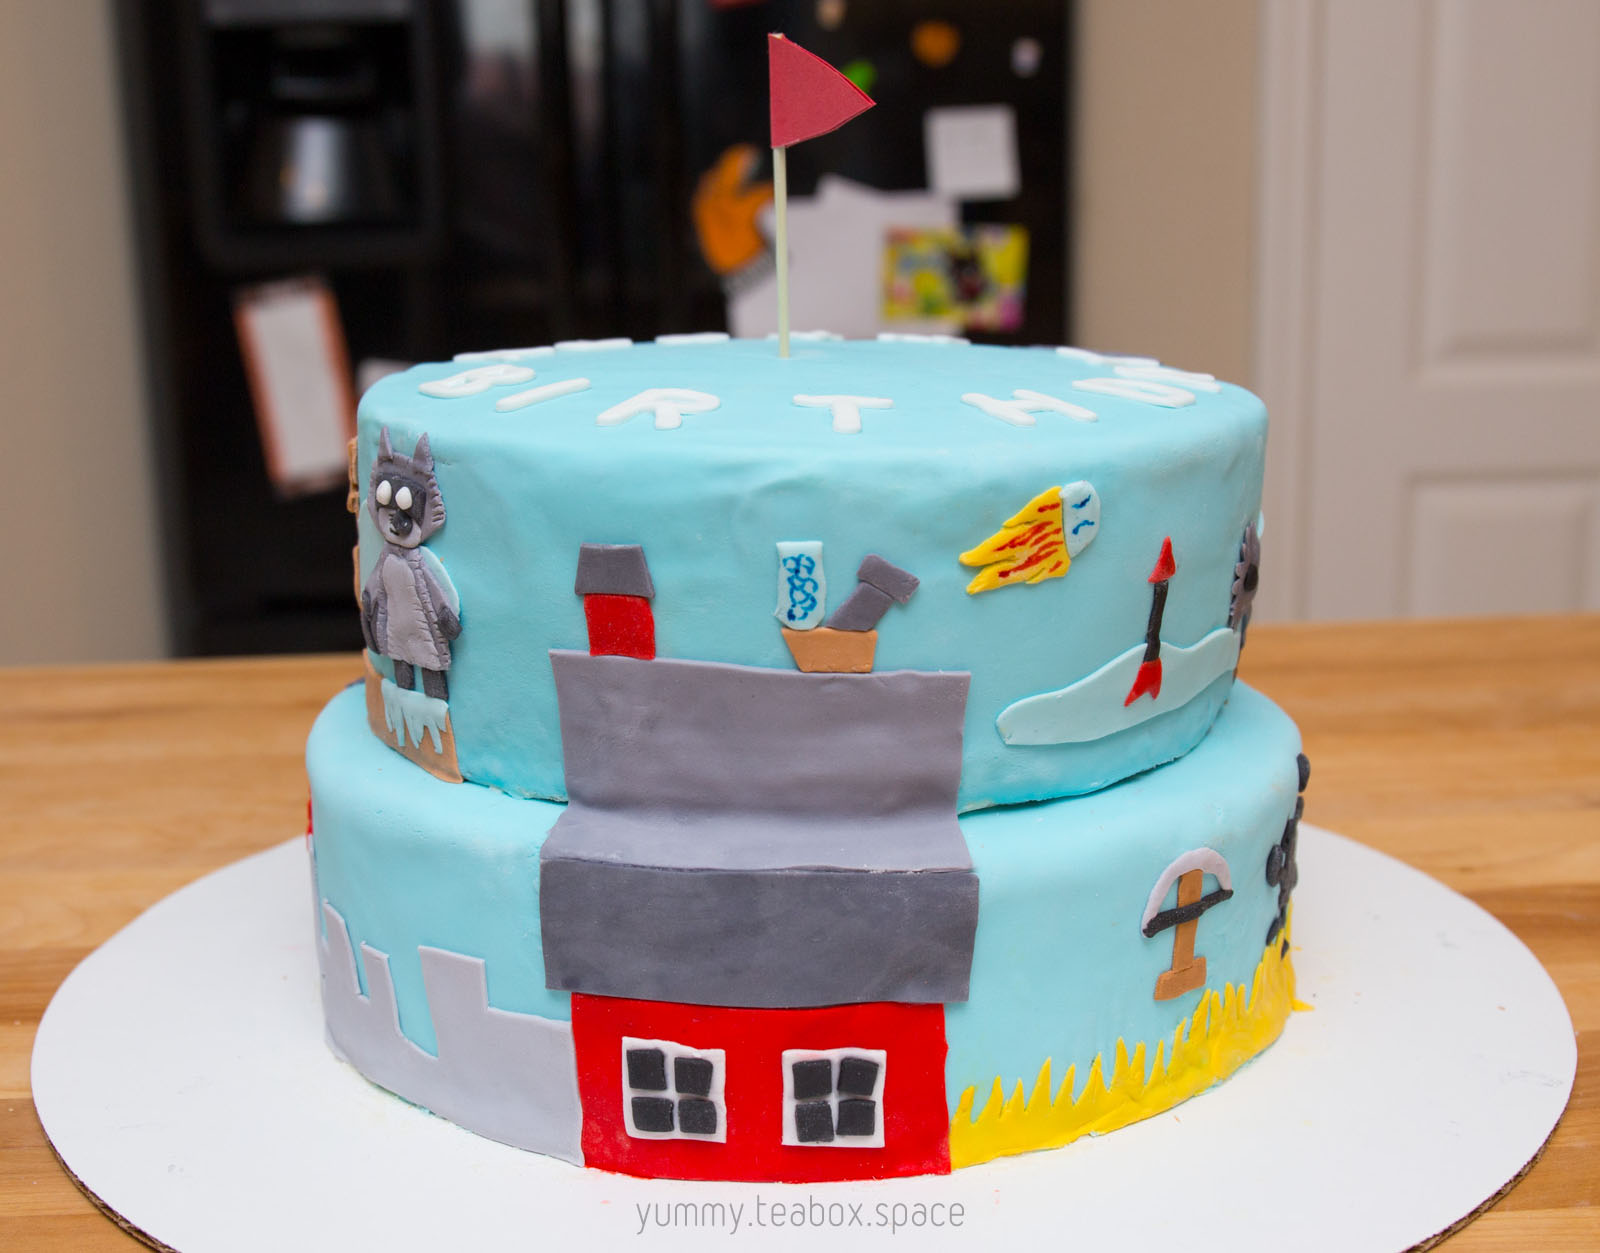 2-tier blue cake with images of racoon and traps on a red barn from Ultimate Chicken Horse on the side.